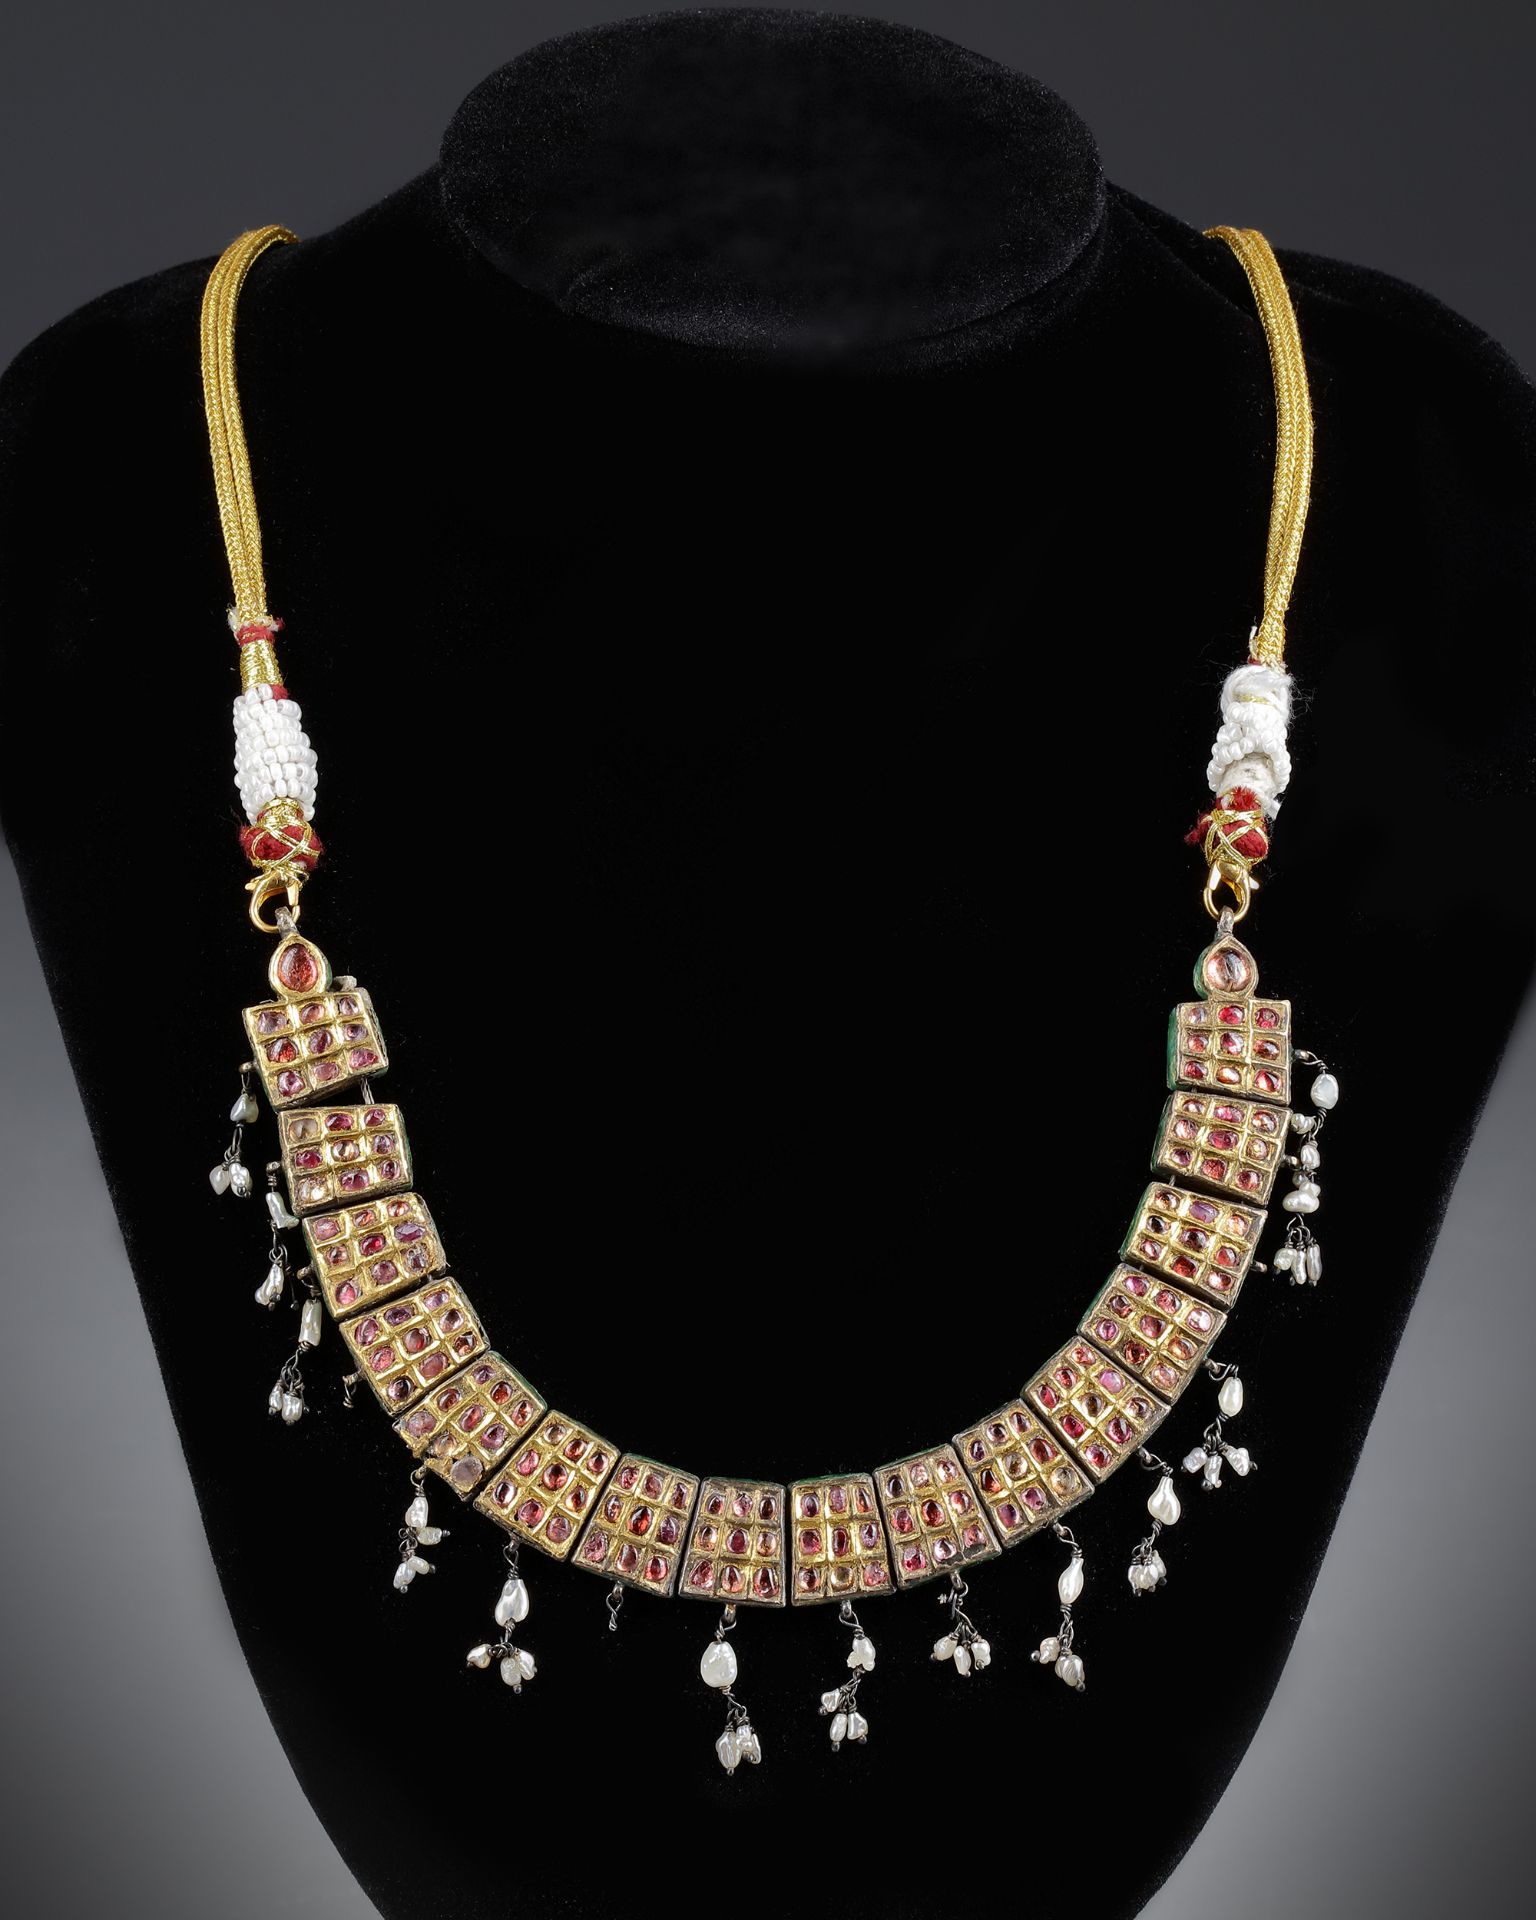 A MUGHAL GEM-SET ENAMELED GOLD NECKLACE, LATE 18TH CENTURY - Image 6 of 6